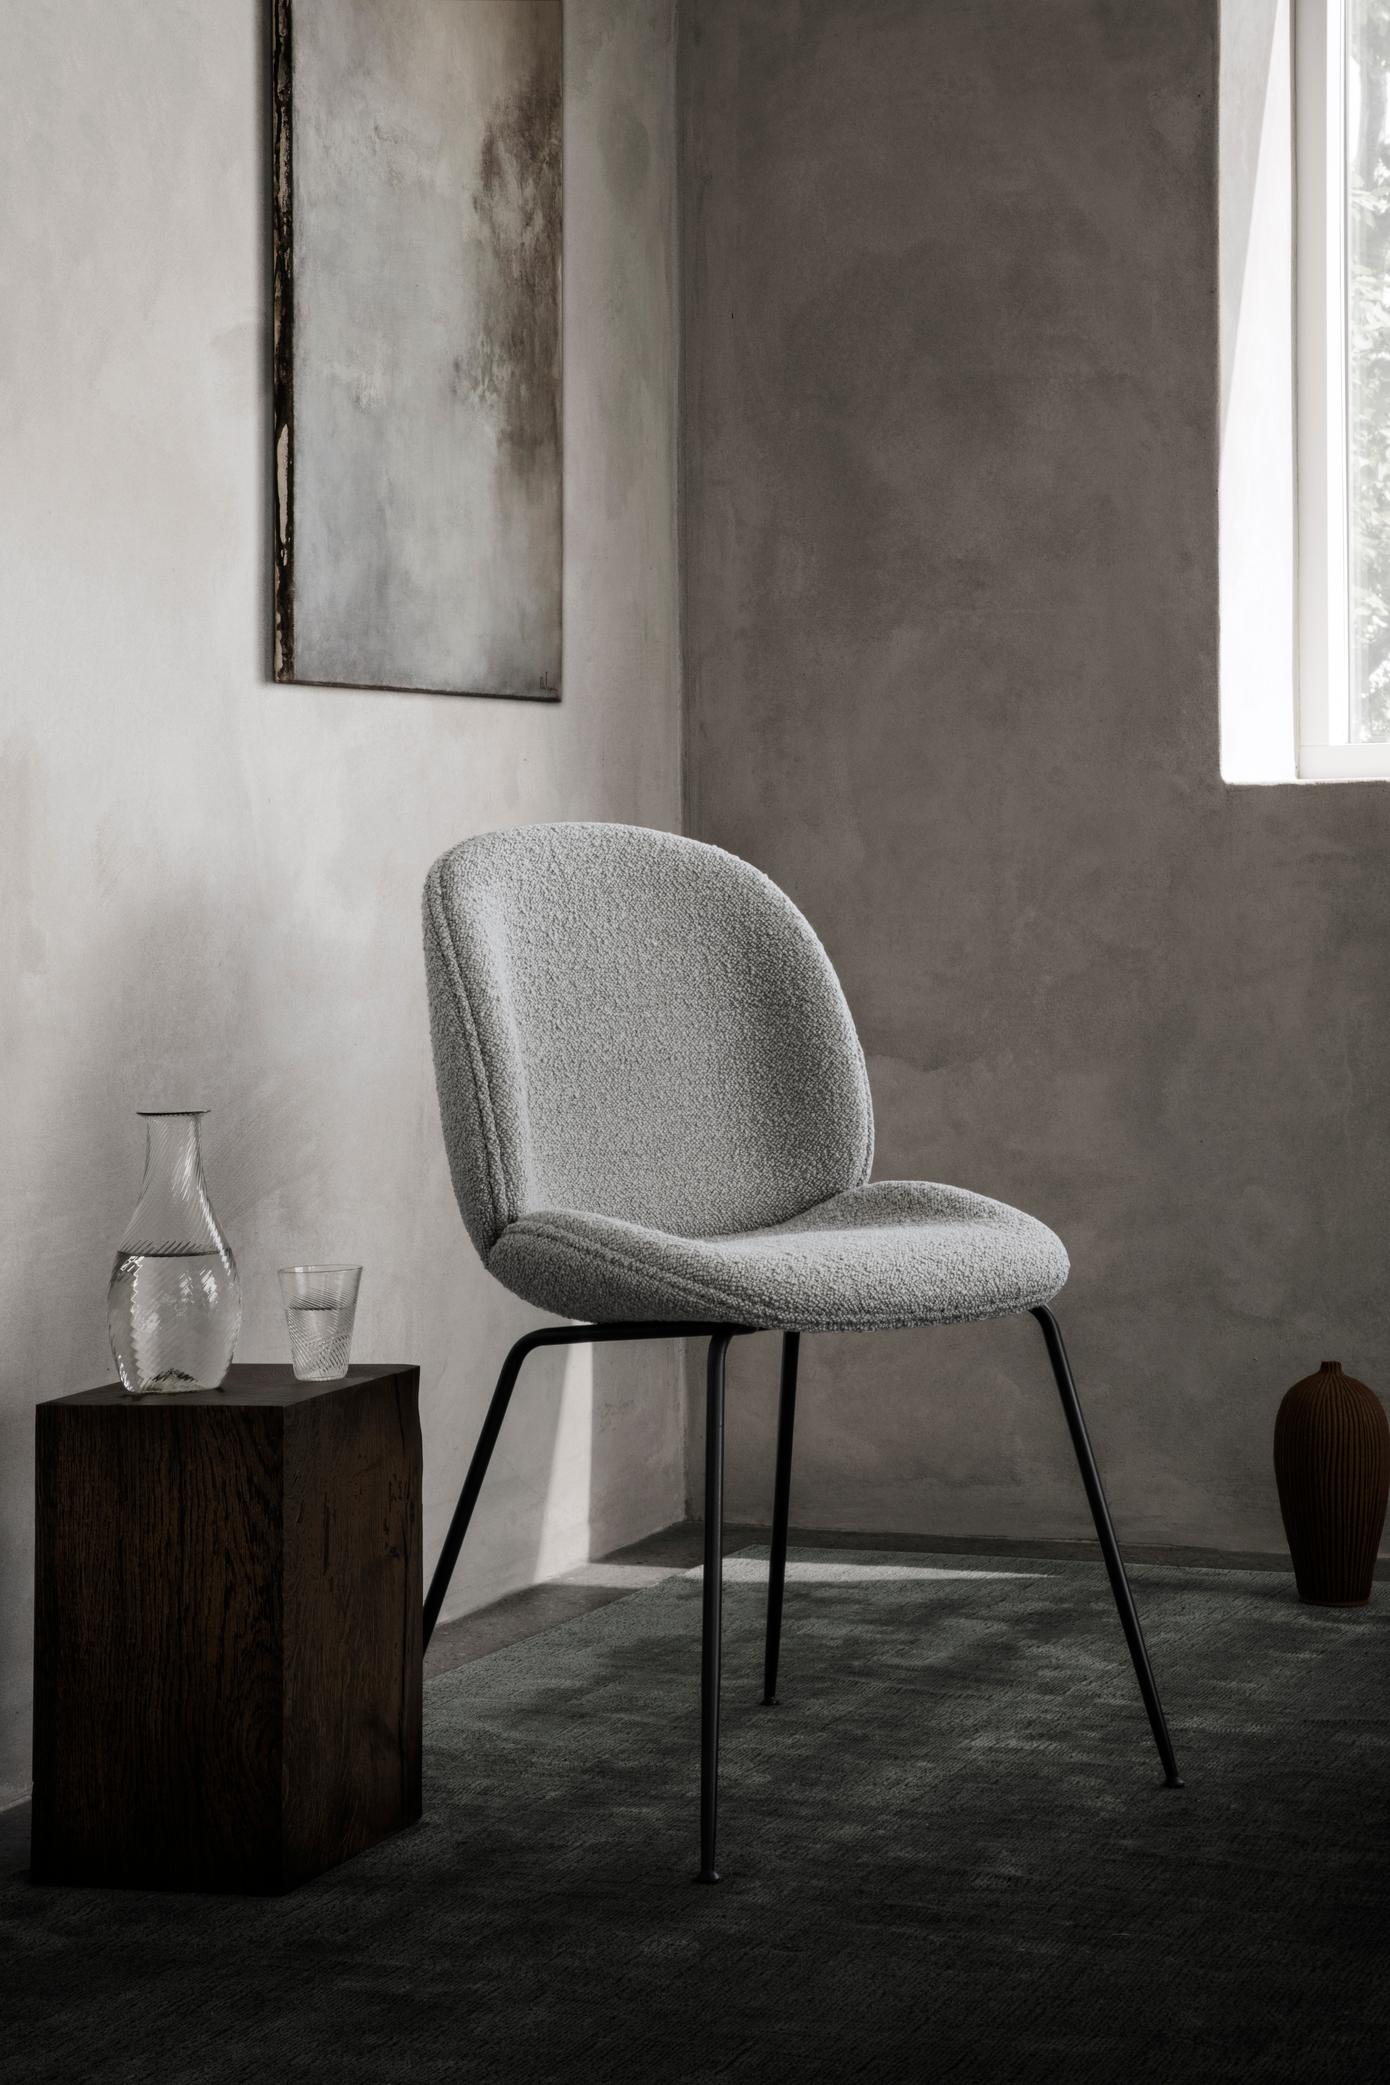 The Beetle Dining Chair has since its introduction in 2013 been well received by end-consumers as well as interior architects. 
Due to its appealing design, outstanding comfort and unique customisation possibilities, the dining chair can be seen in